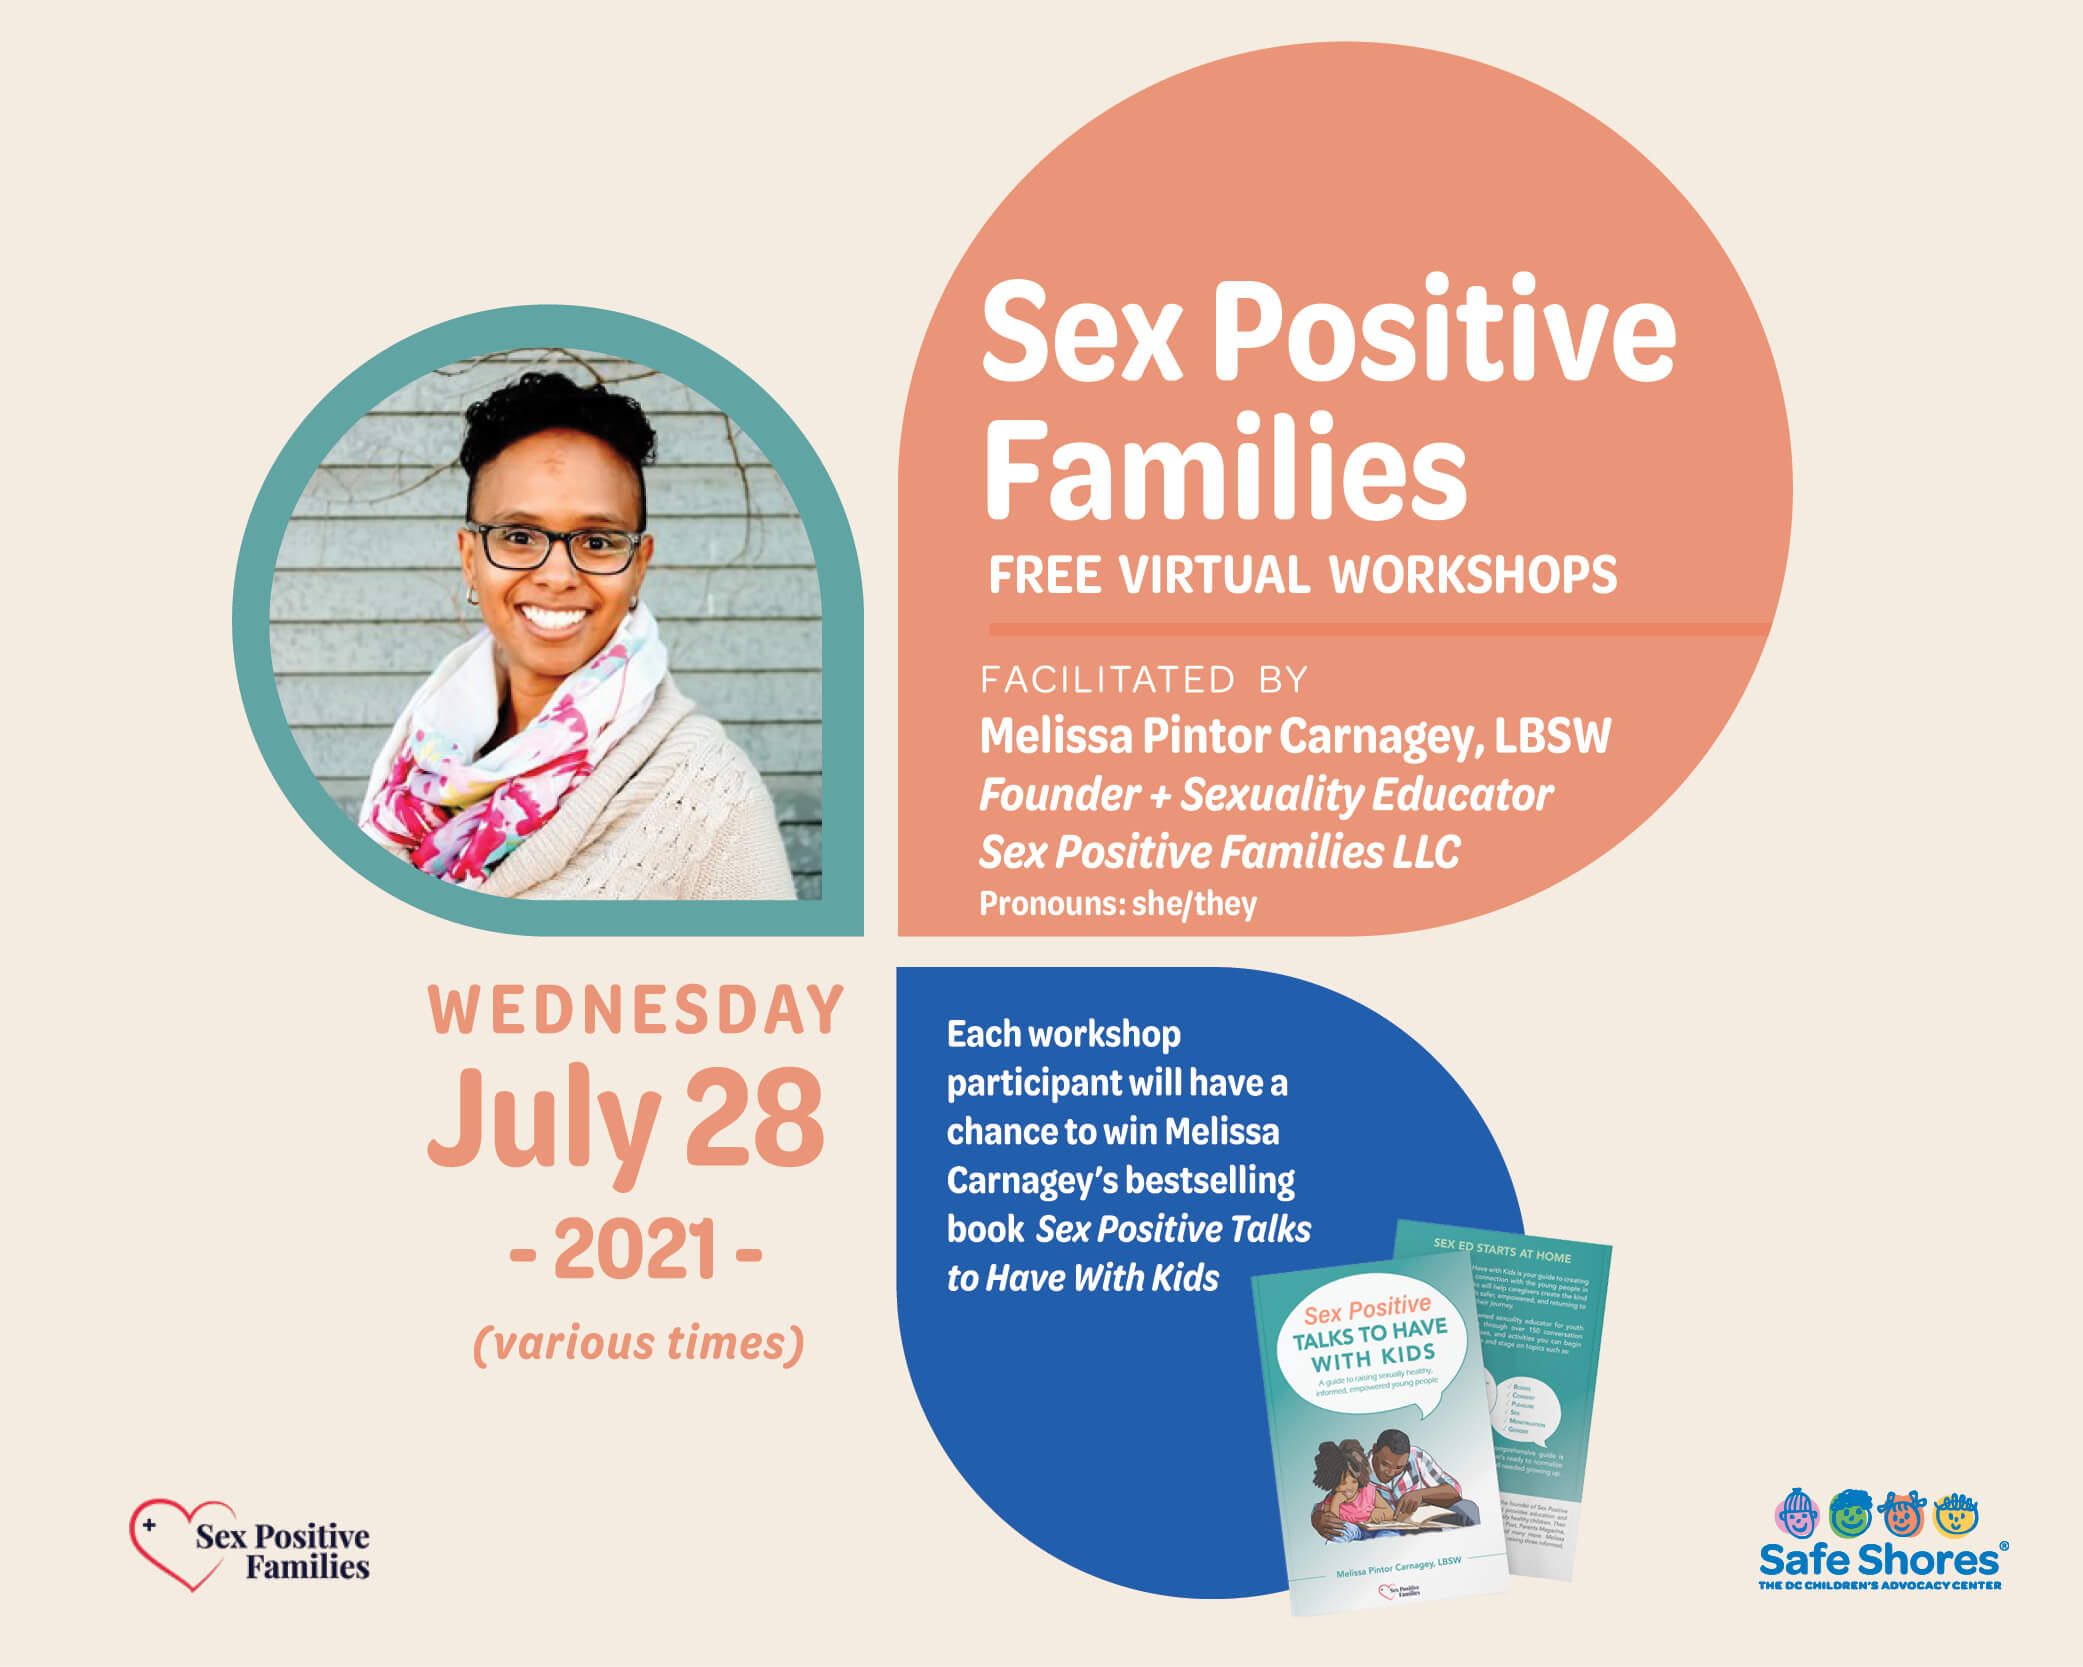 Sex Positive Families Workshop Series (FREE) on July 28th Safe Shores